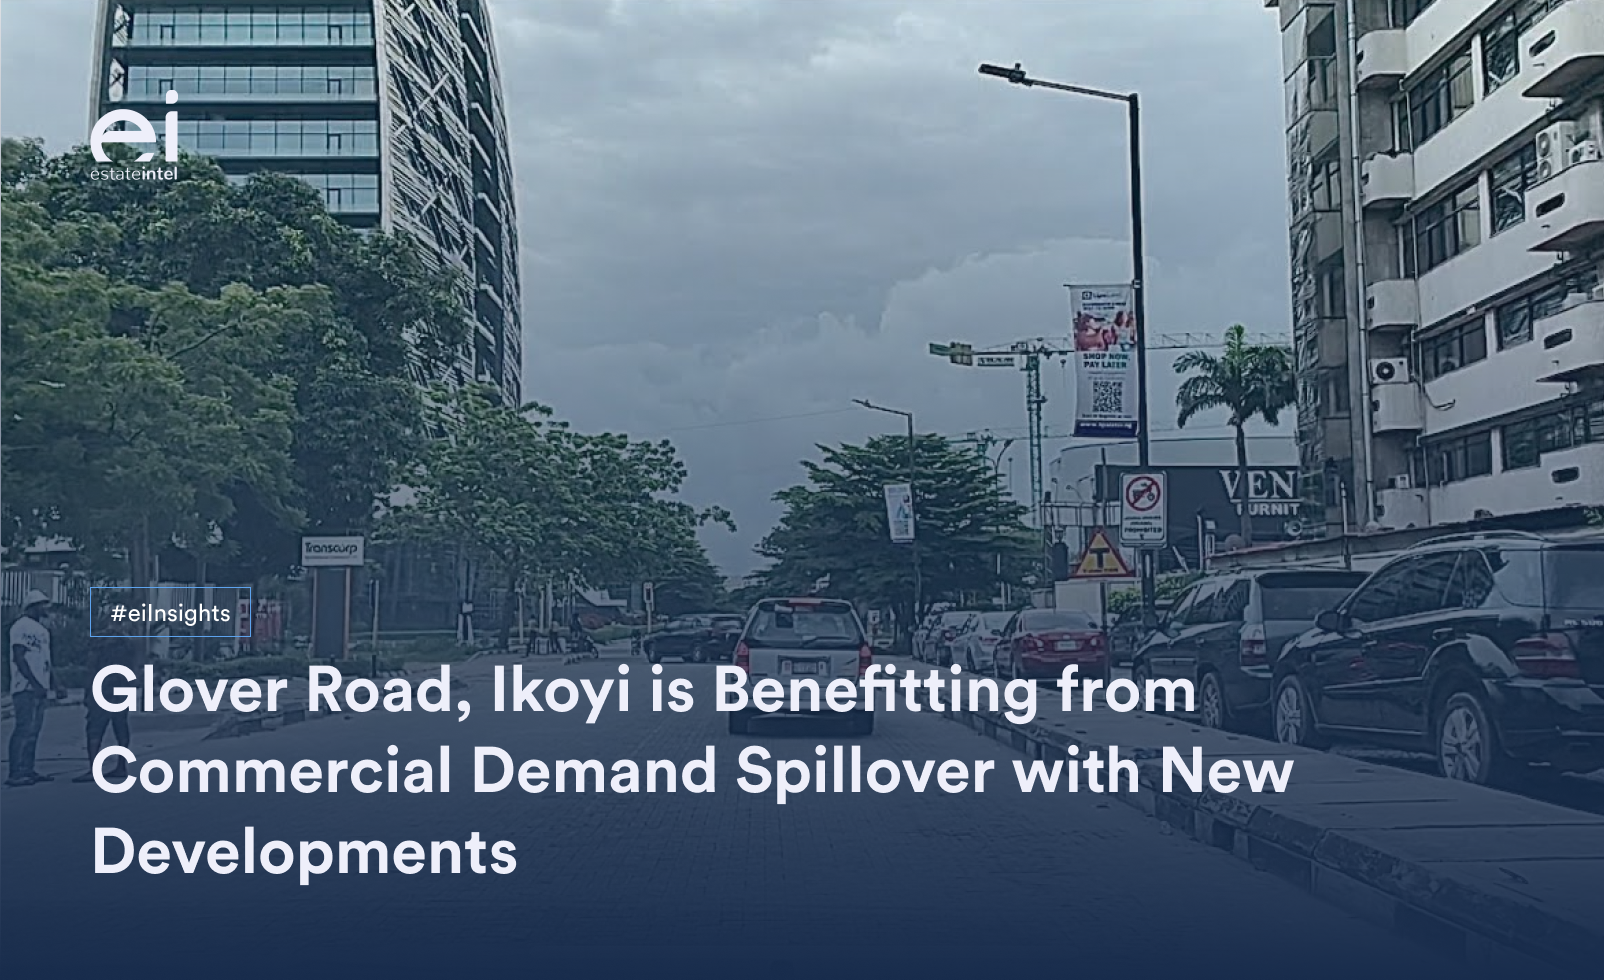 Glover Road, Ikoyi is Benefitting from Commercial Demand Spillover with New Developments